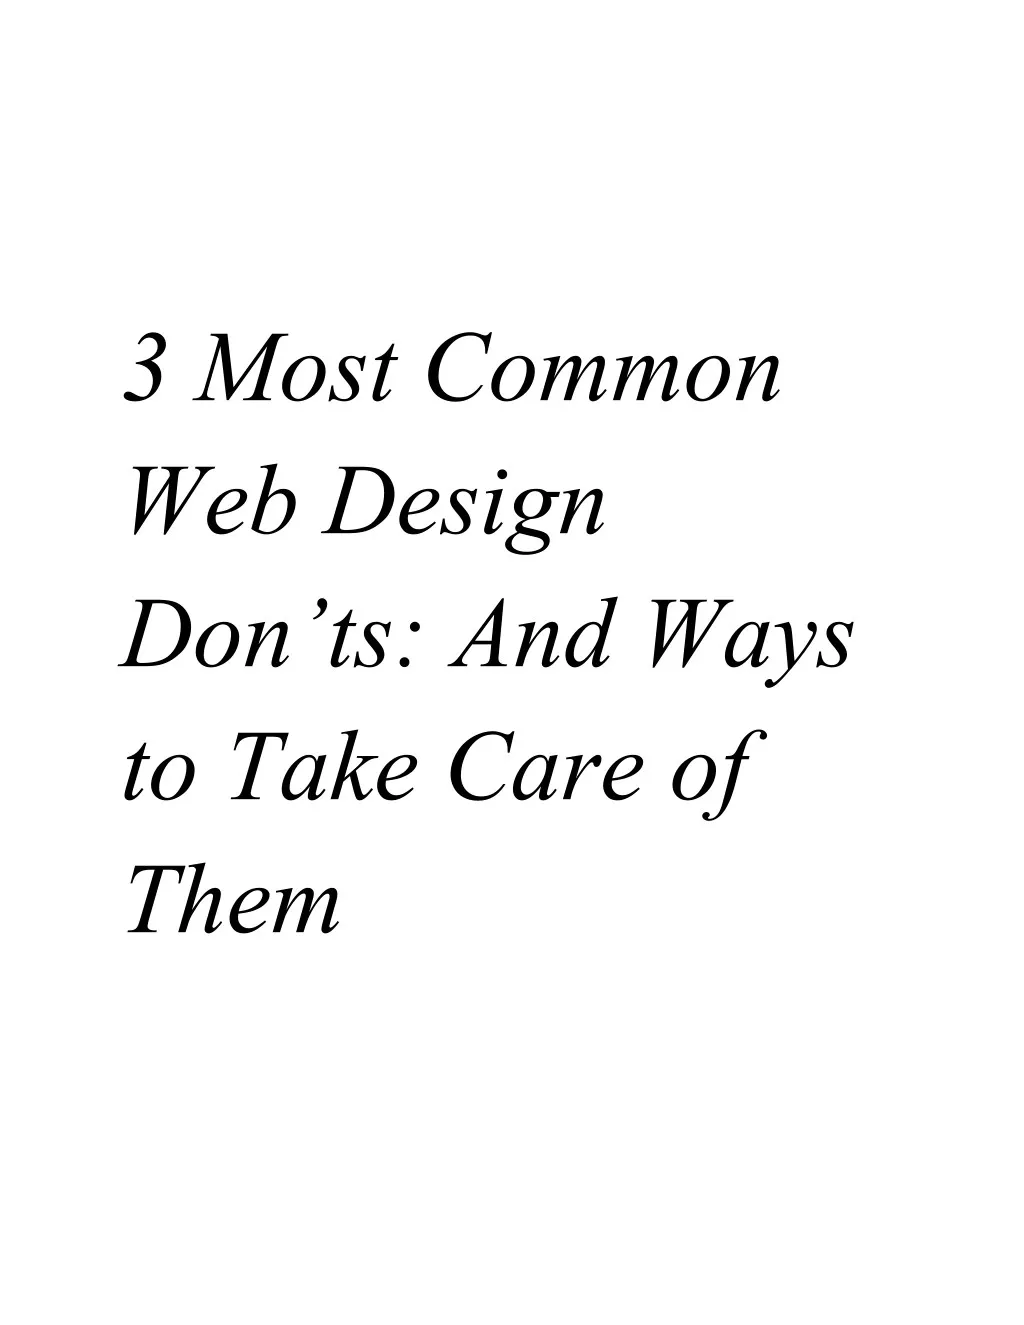 3 most common web design don ts and ways to take